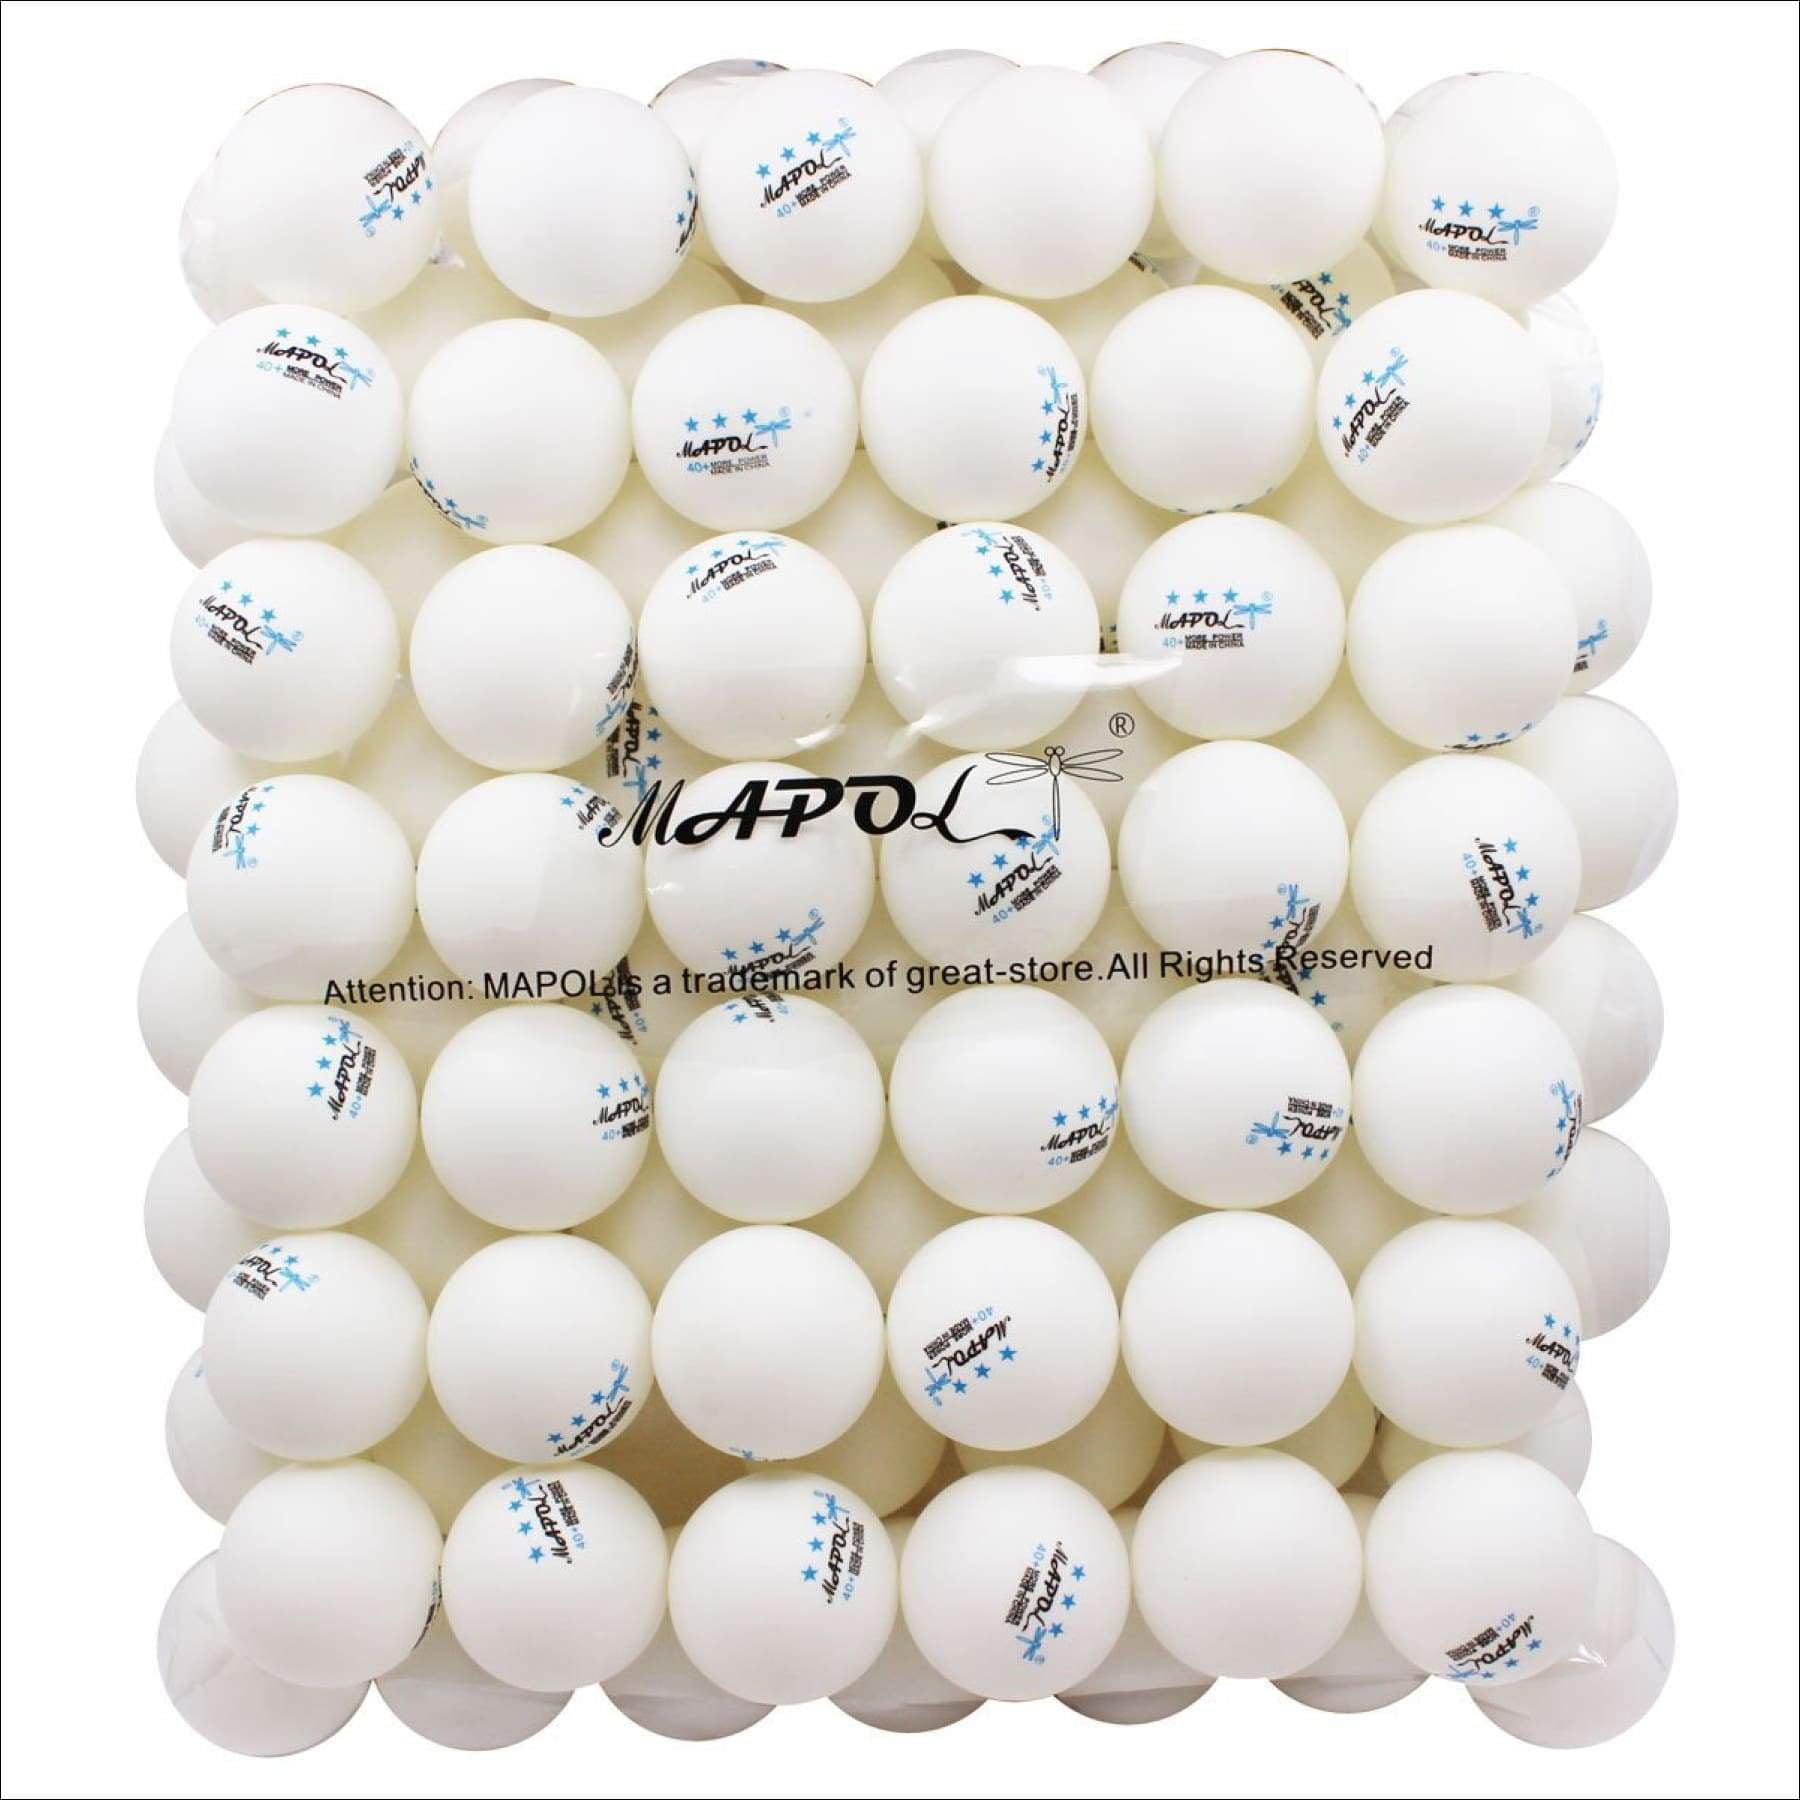 50 Count for sale online MAPOL MP-004 Table Tennis Balls